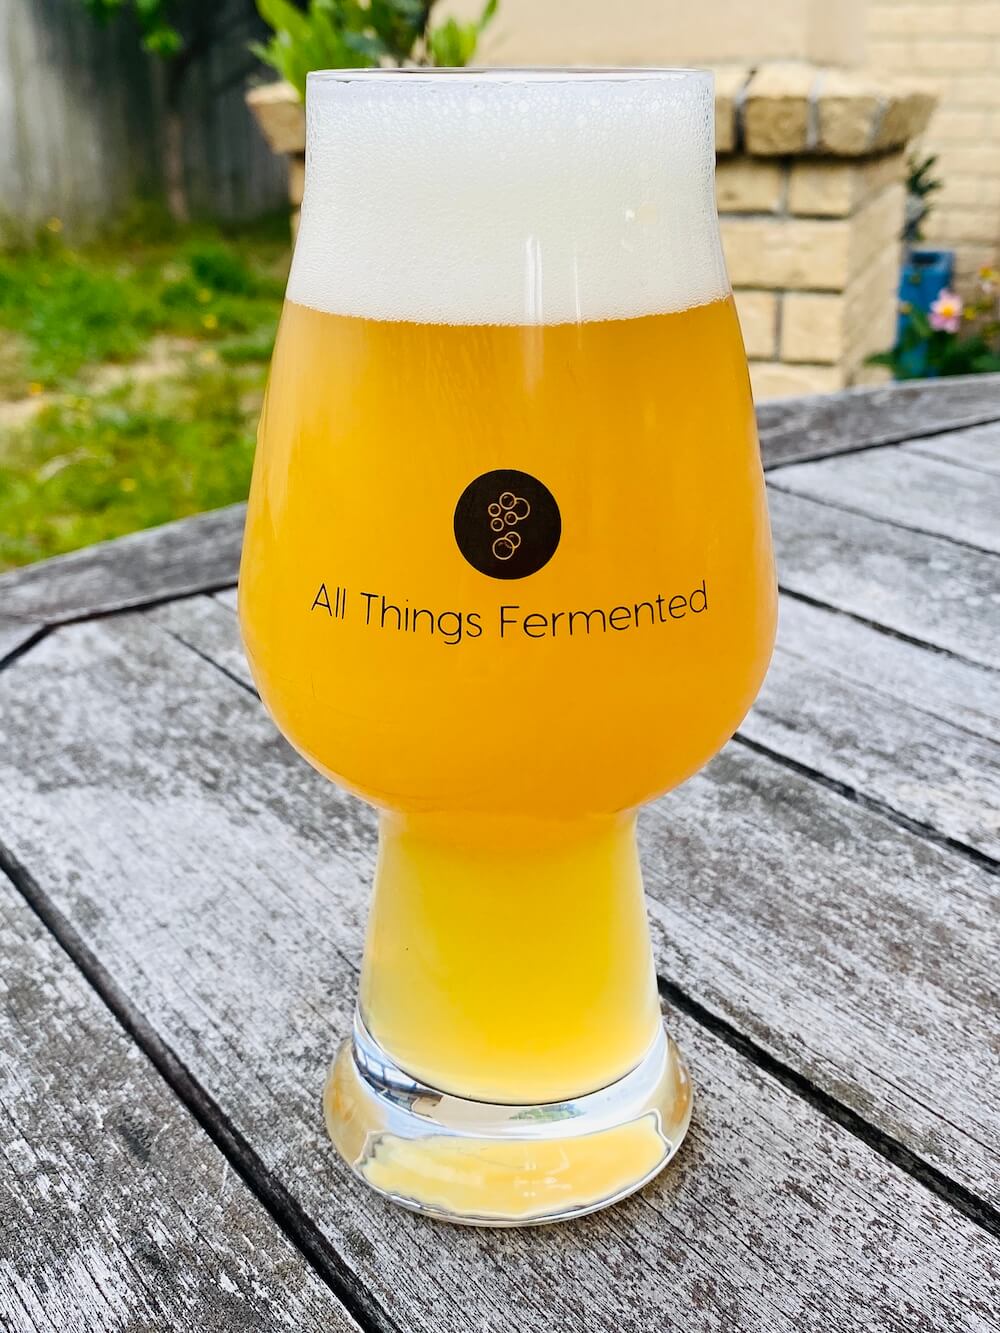 All Things Fermented IPA Glass - 540ml - All Things Fermented | Home Brew Shop NZ | Supplies | Equipment